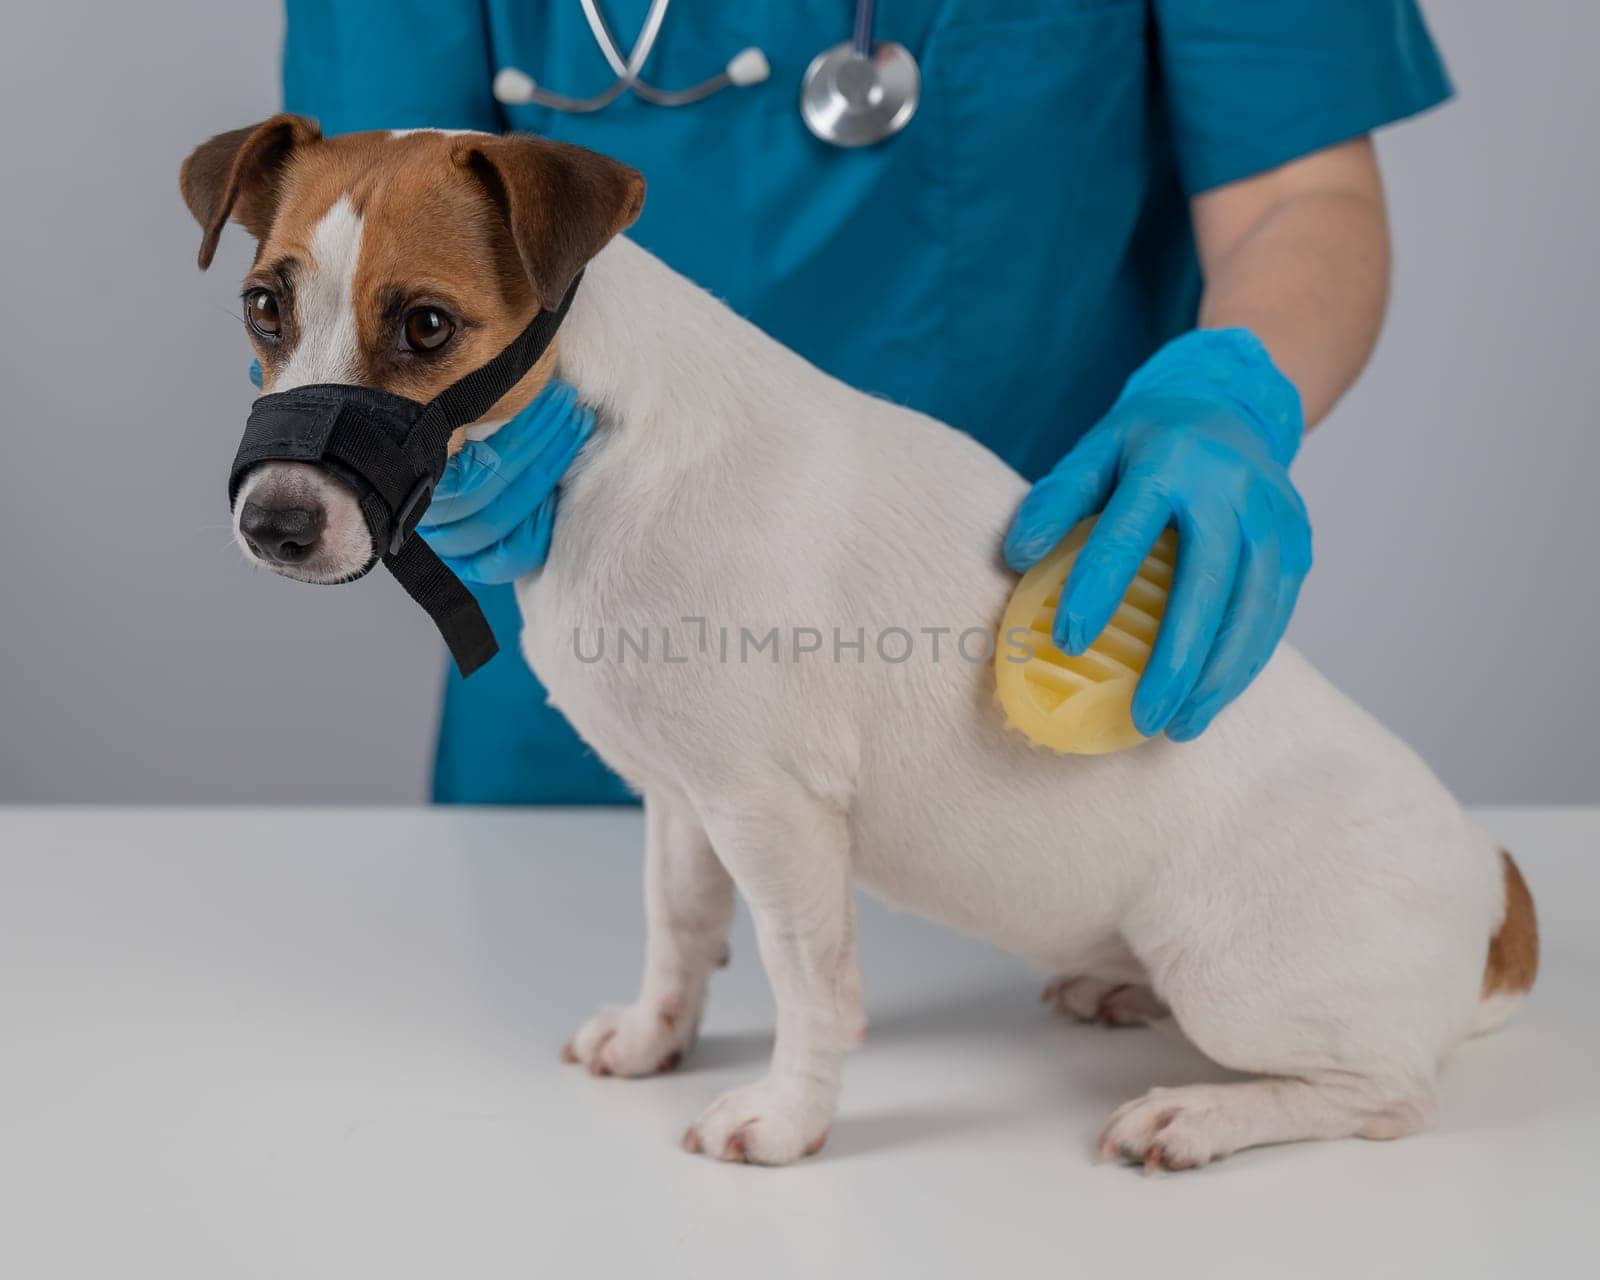 A veterinarian brushes a dog with a silicone brush. Jack Russell Terrier in a muzzle during grooming